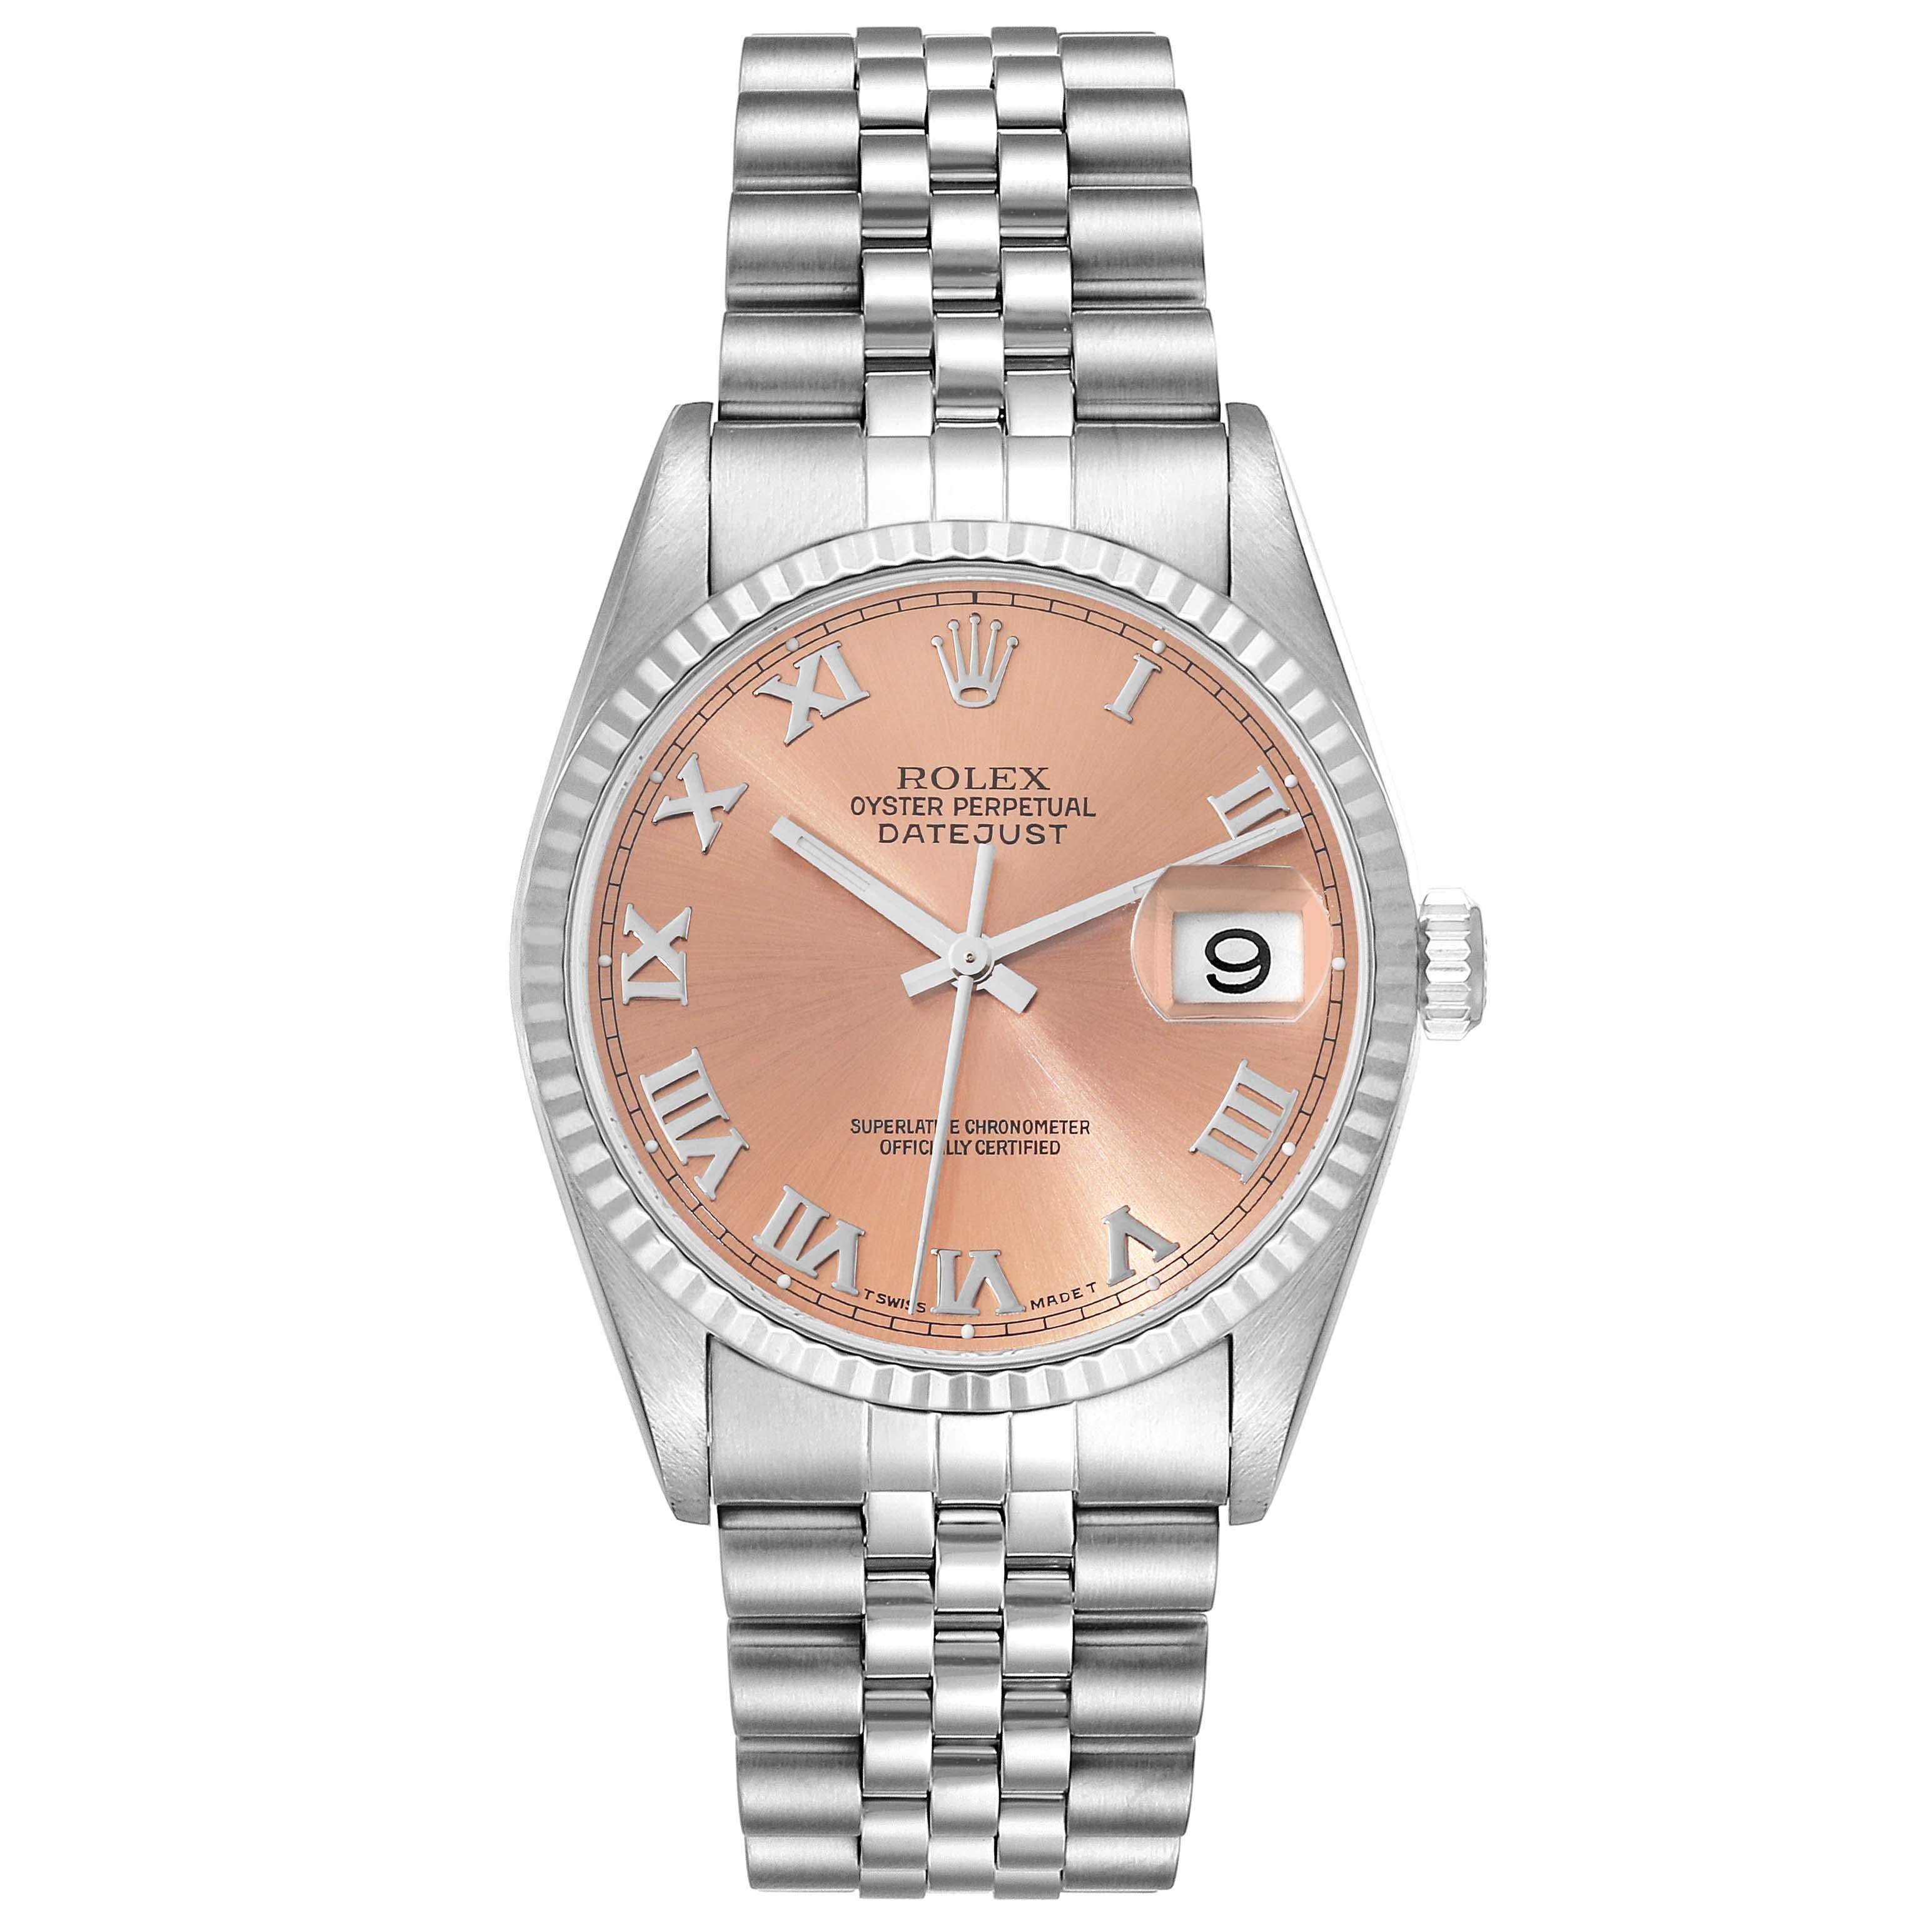 Rolex Datejust 36 Steel White Gold Salmon Roman Dial Mens Watch 16234. Officially certified chronometer automatic self-winding movement. Stainless steel oyster case 36 mm in diameter. Rolex logo on the crown. 18k white gold fluted bezel. Scratch